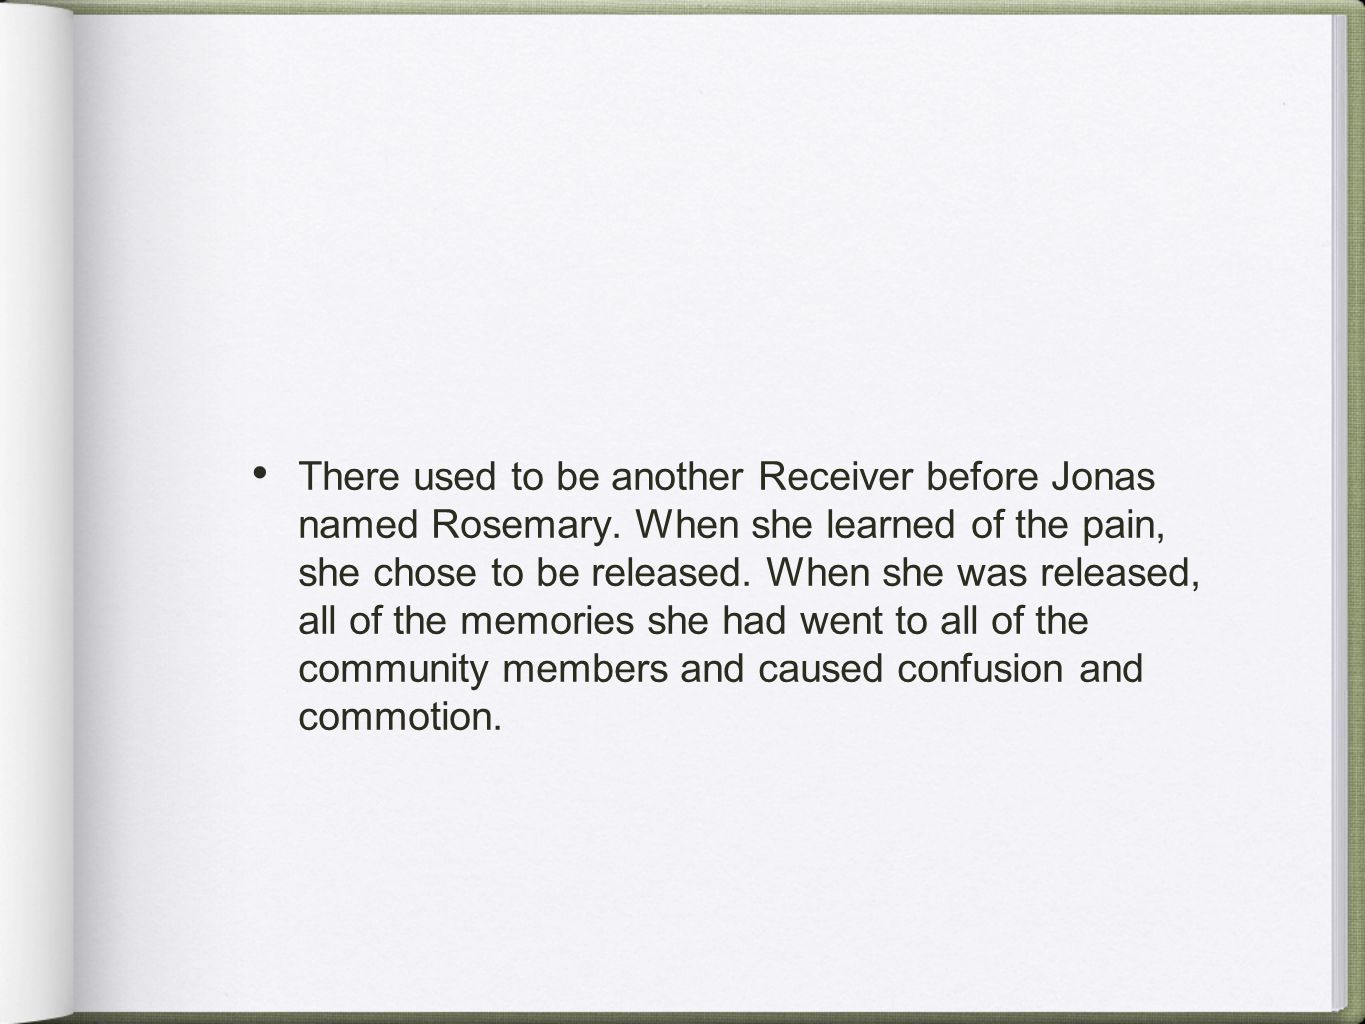 There used to be another Receiver before Jonas named Rosemary.